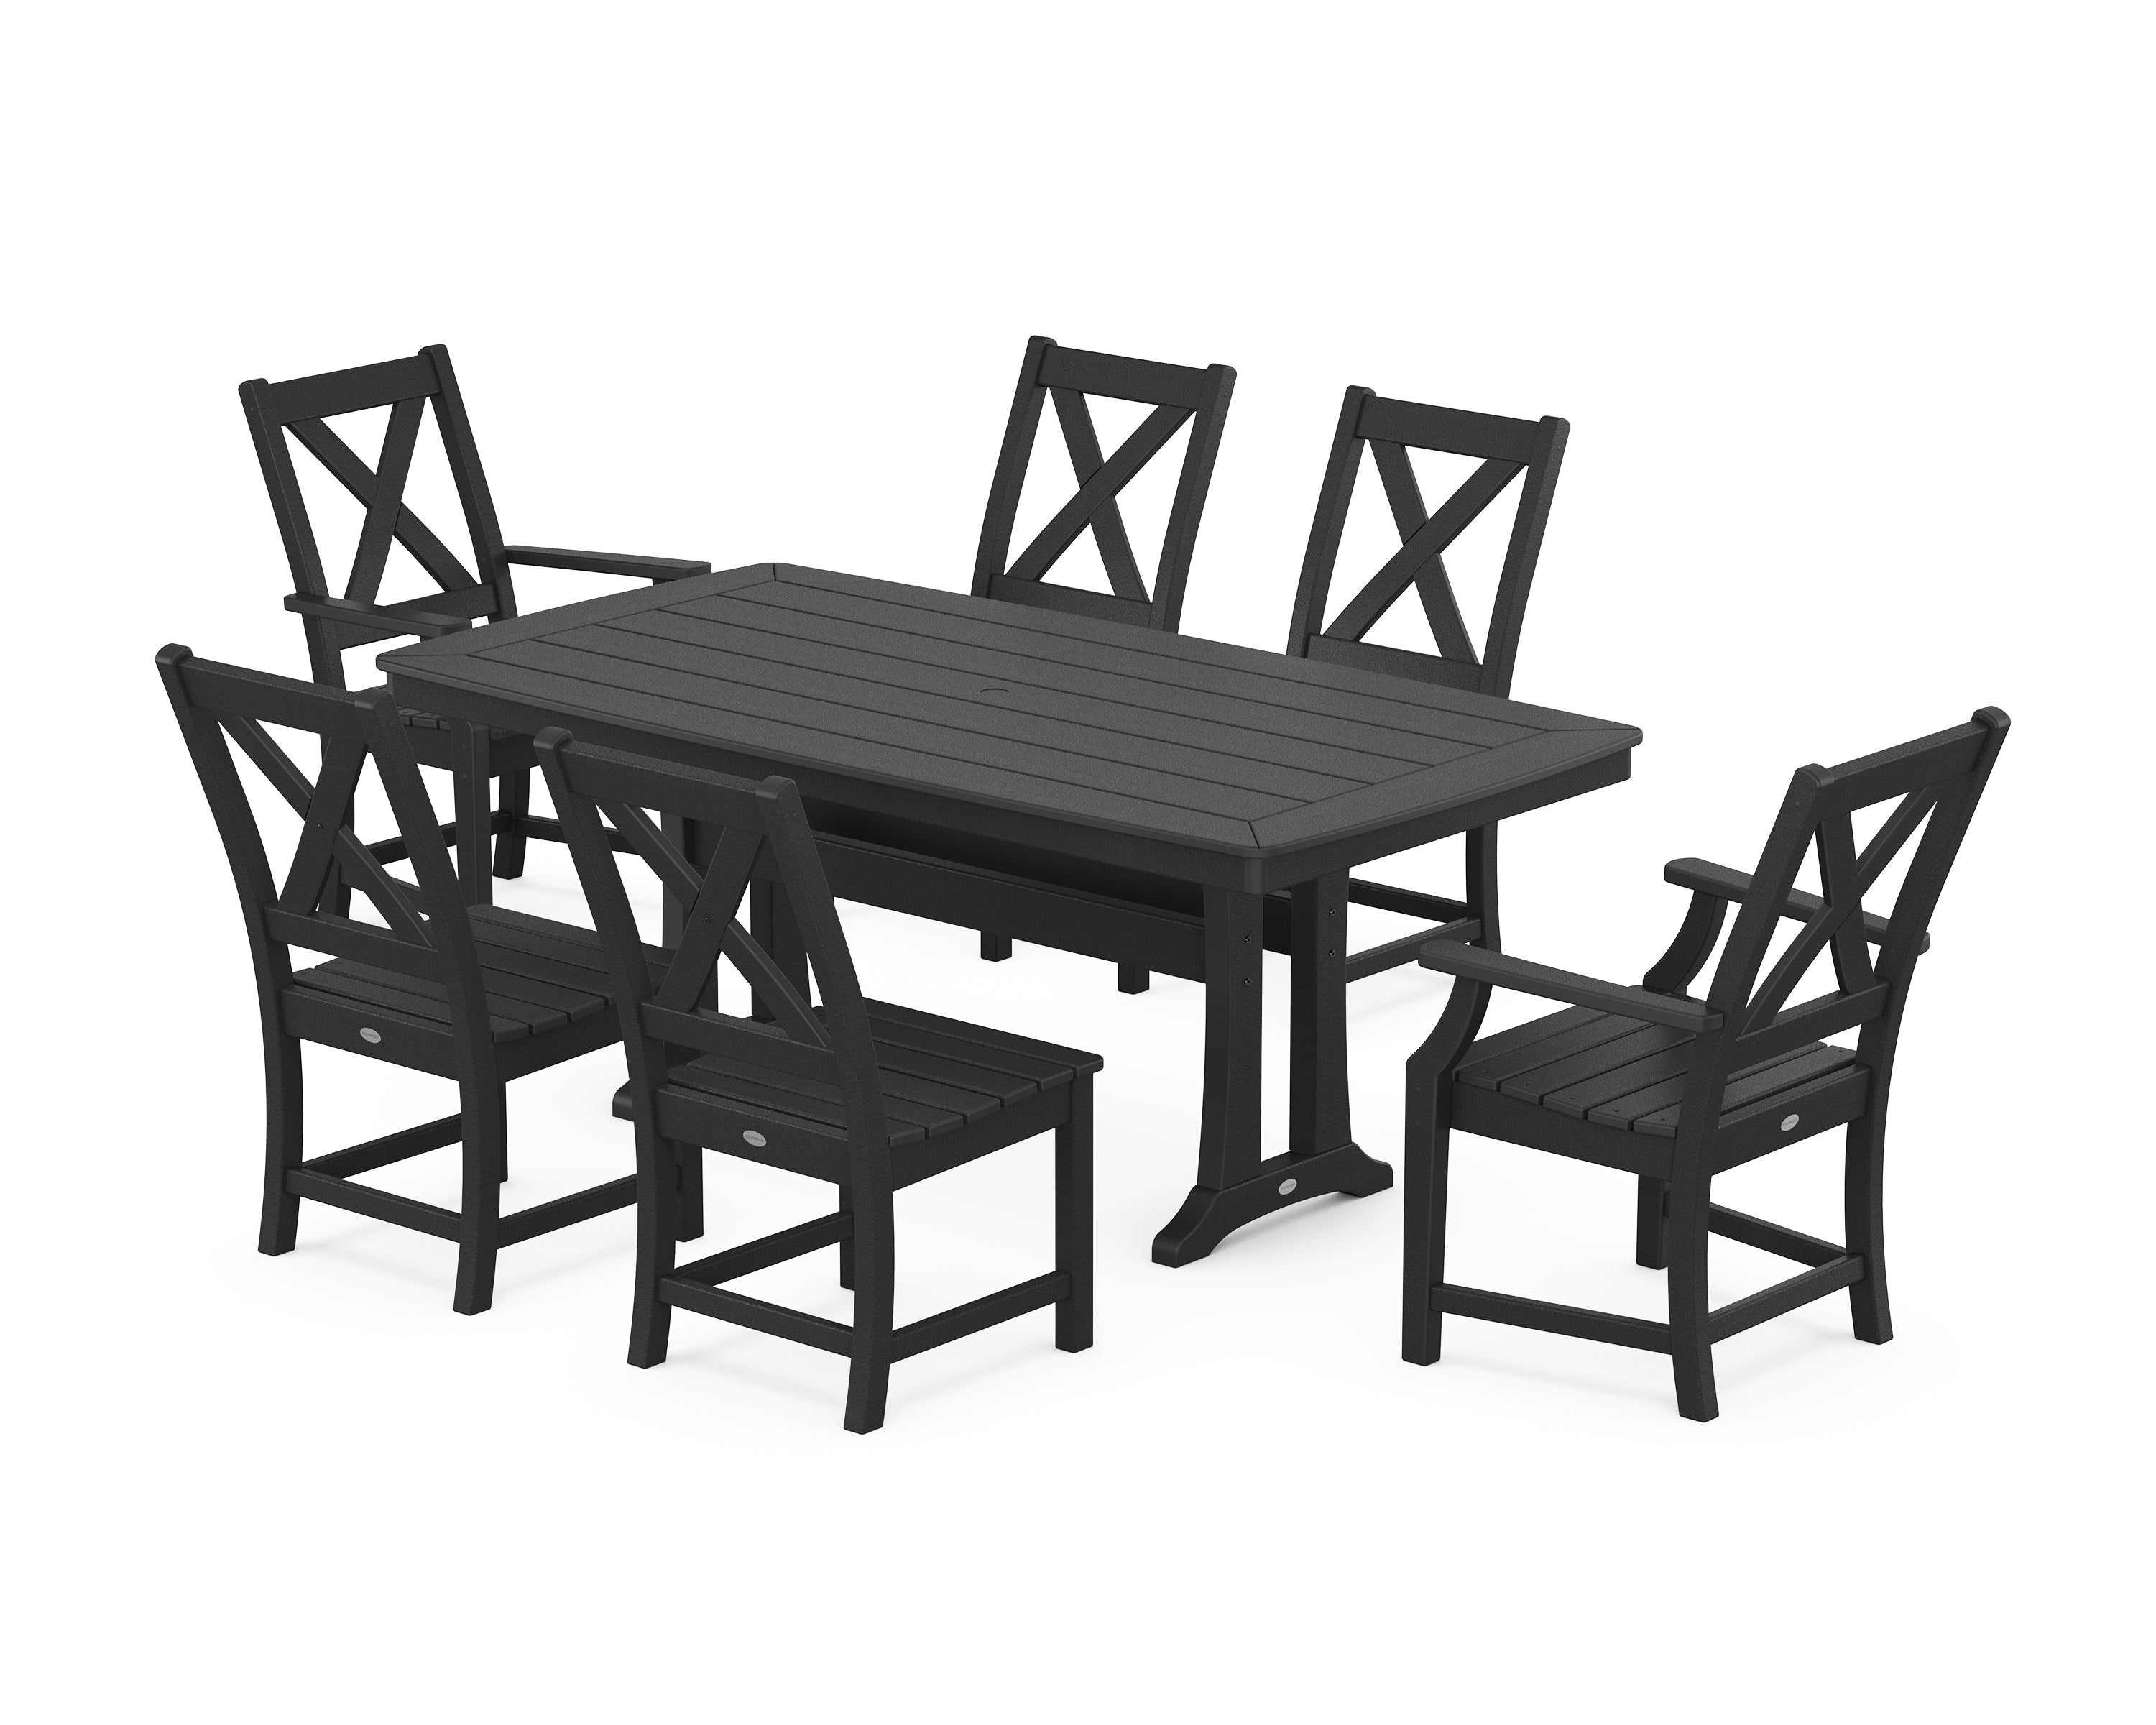 POLYWOOD® Braxton 7-Piece Dining Set with Trestle Legs in Black